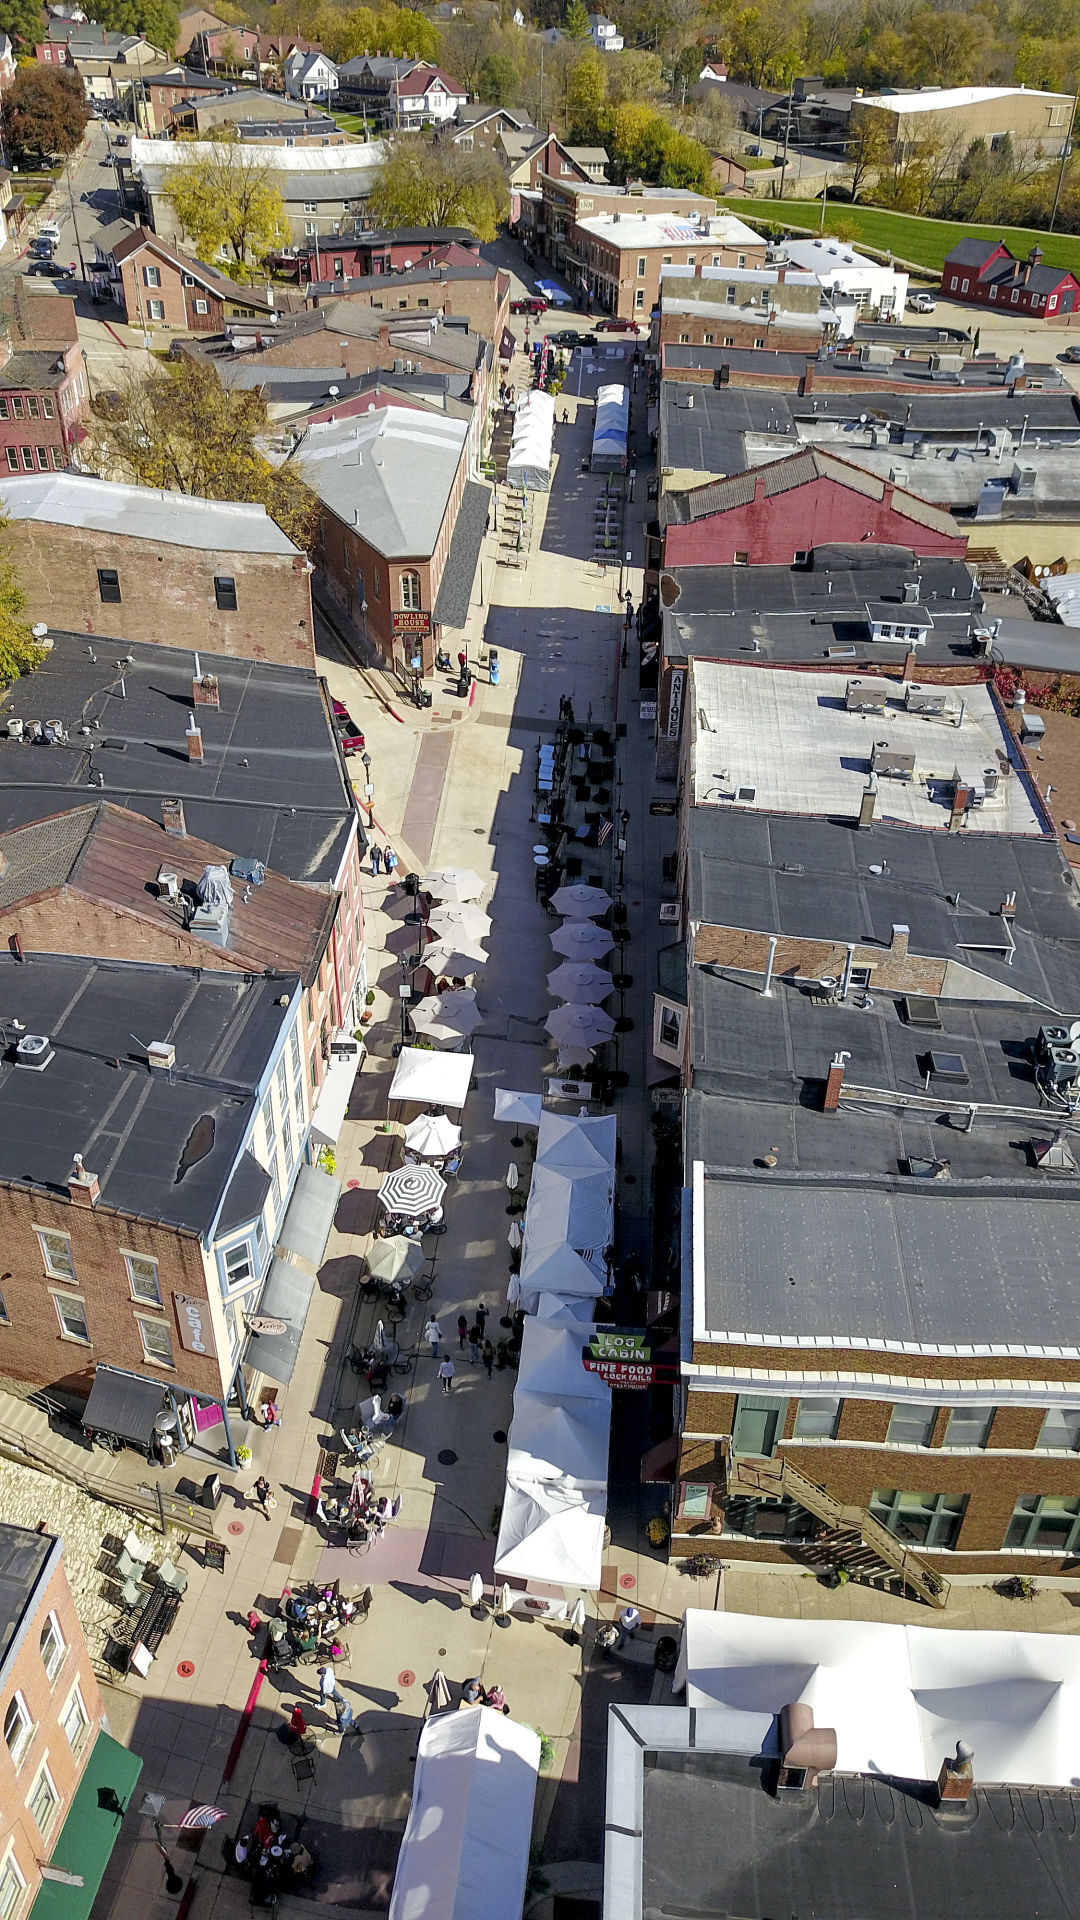 Outdoor dining on Galena’s Main Street proved popular in October (above), and some City Council members would like to continue the practice in 2021. PHOTO CREDIT: Dave Kettering